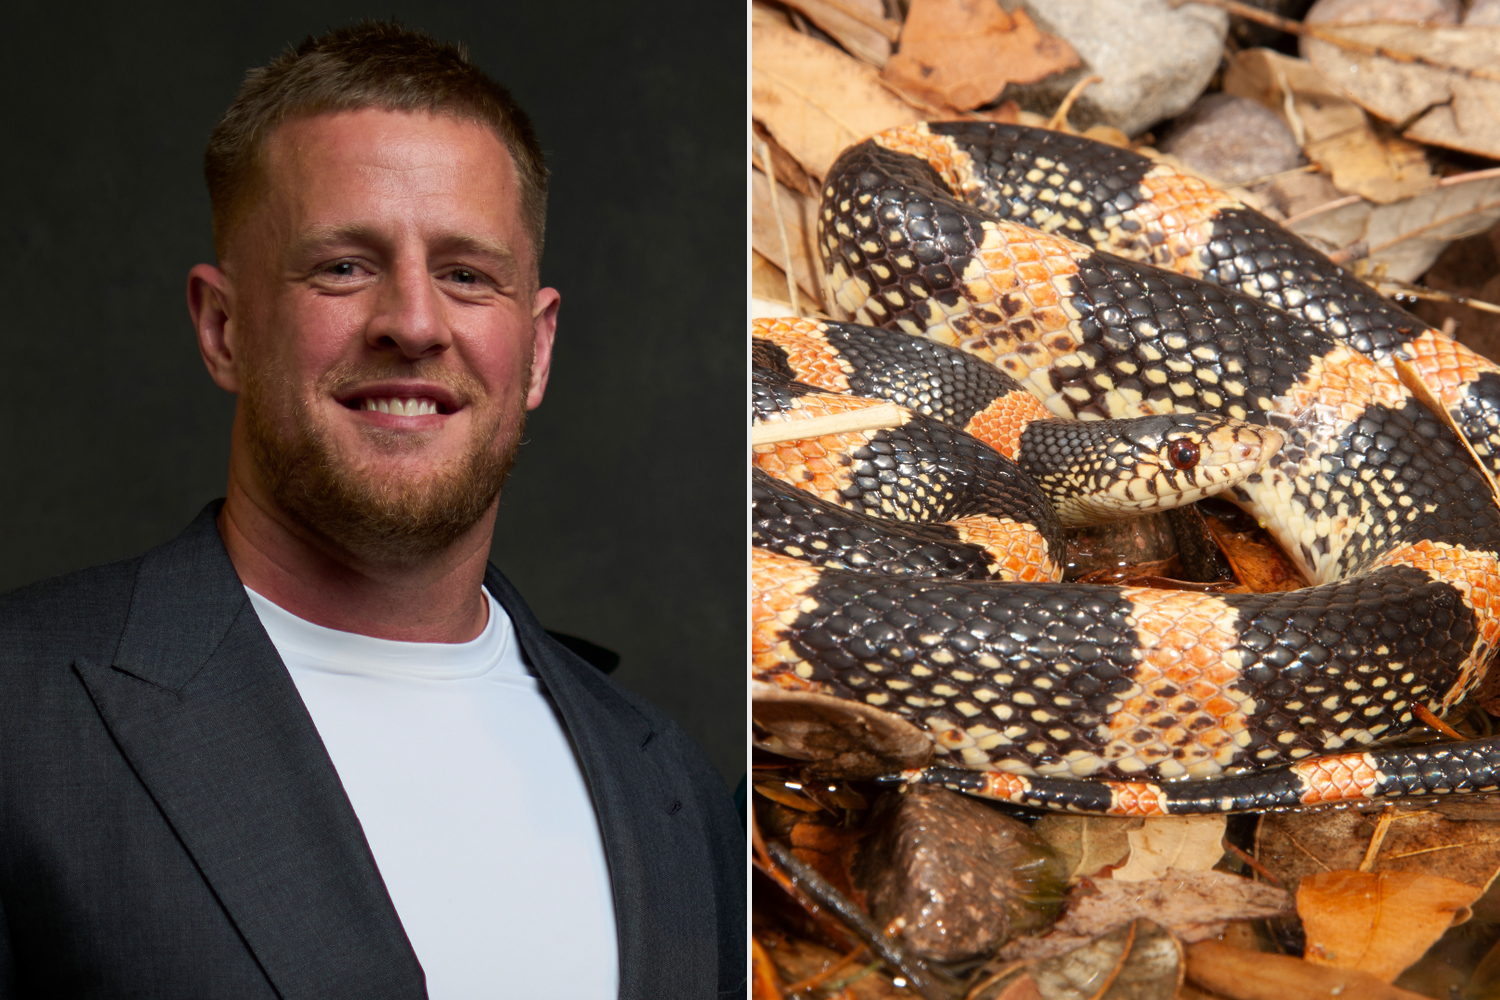 JJ Watt Says He Felt 'Like a Wimp' After Finding a Snake in the Bathroom of His Arizona Home; Long-nosed Snake